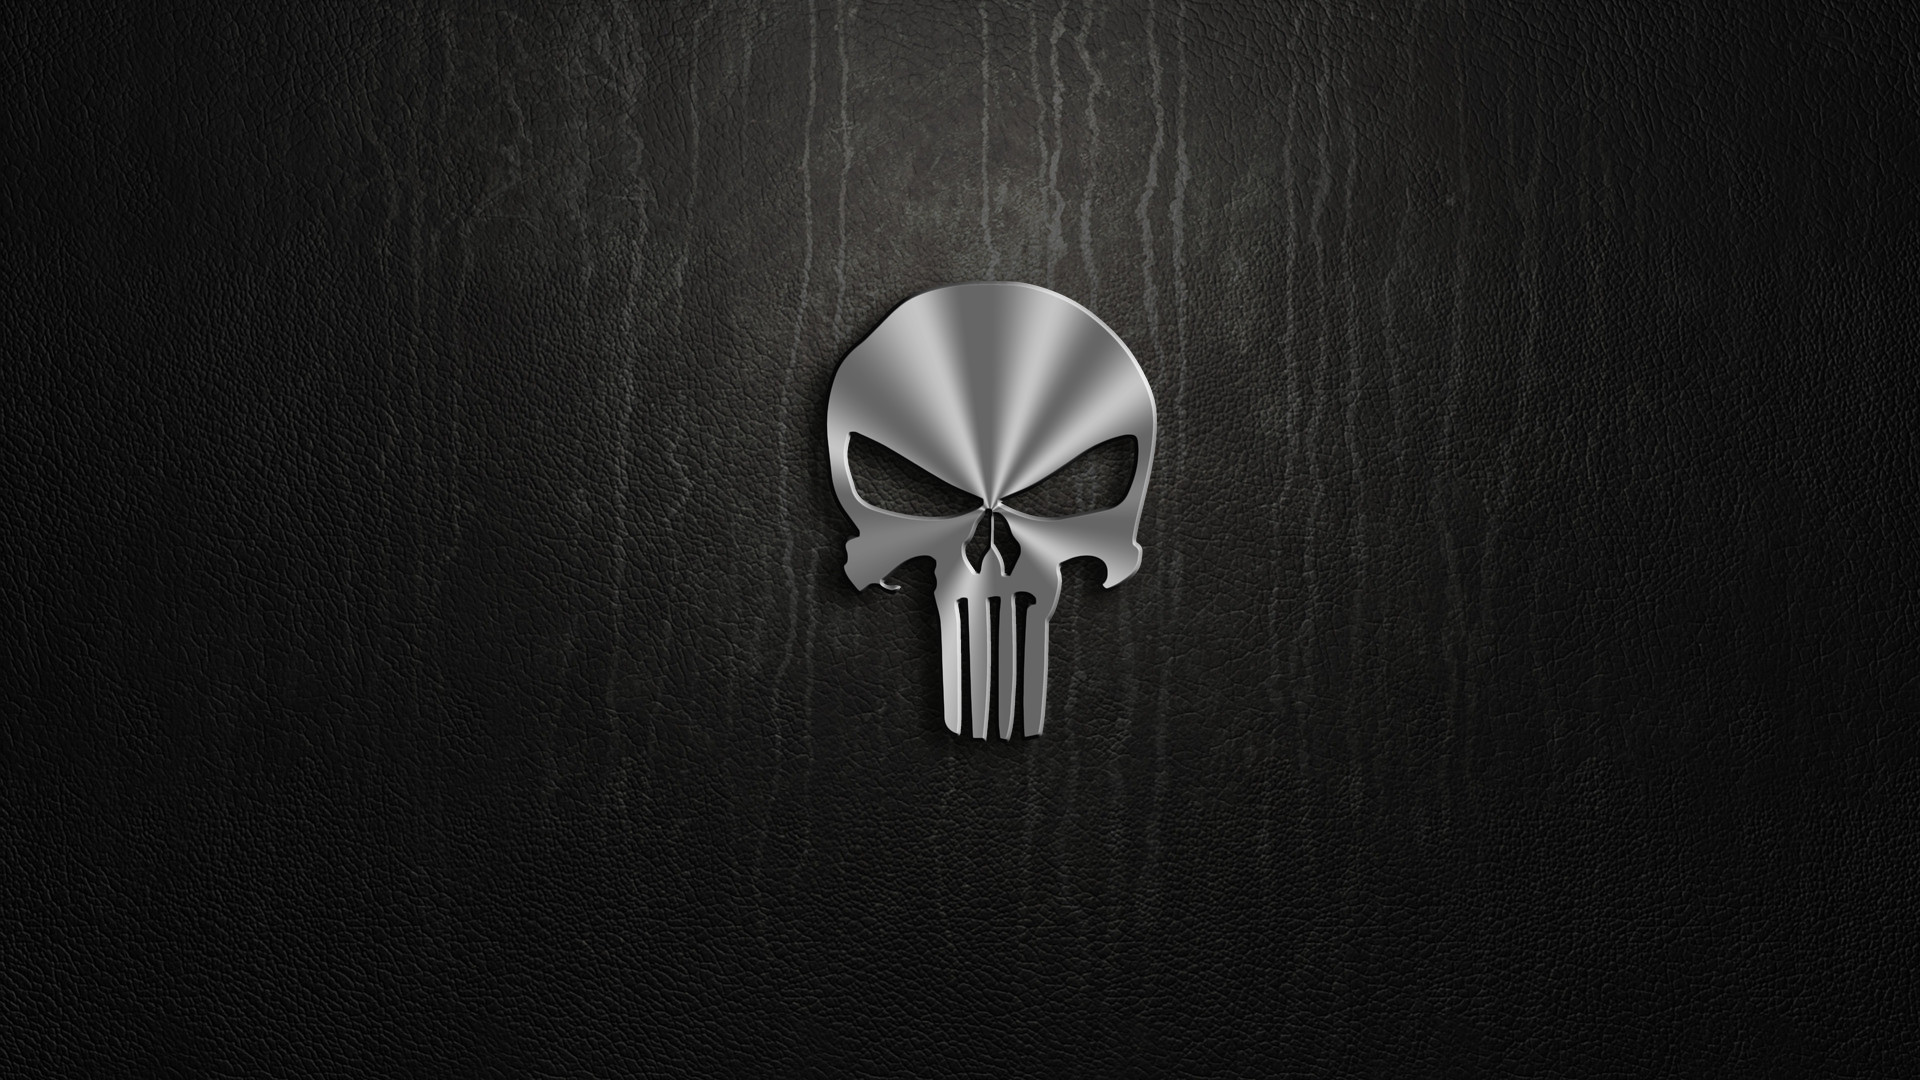 1920x1080 iPT PC Wallpapers WP.41: Punisher, Awesome Pics